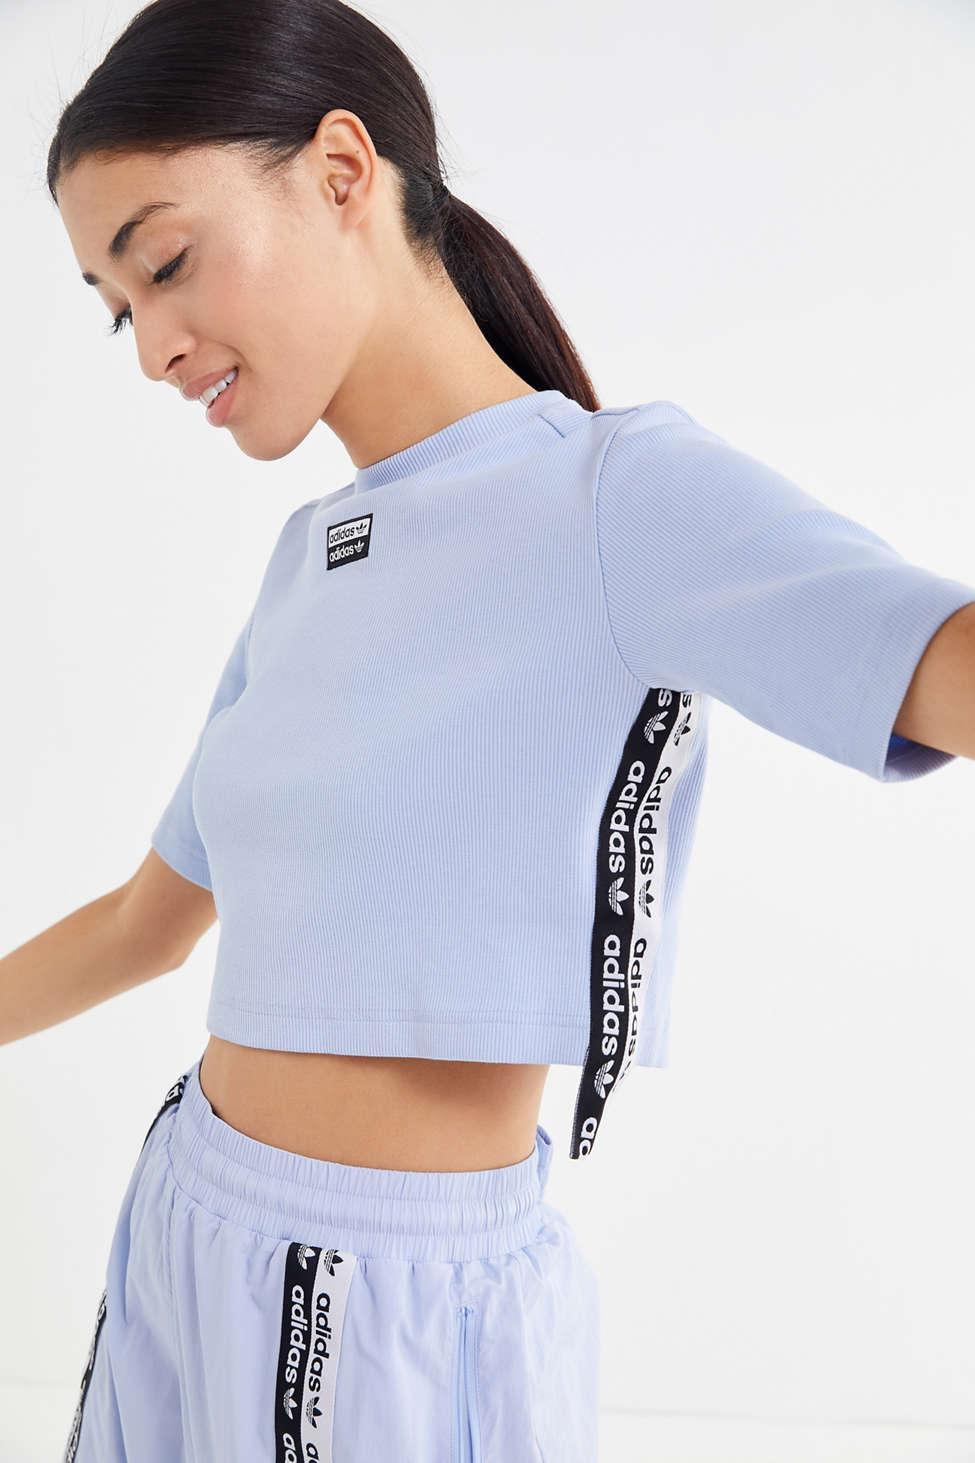 Adidas Originals Reveal Your Voice Ribbed Side Tape Cropped Tee United  Kingdom, SAVE 30% - mpgc.net